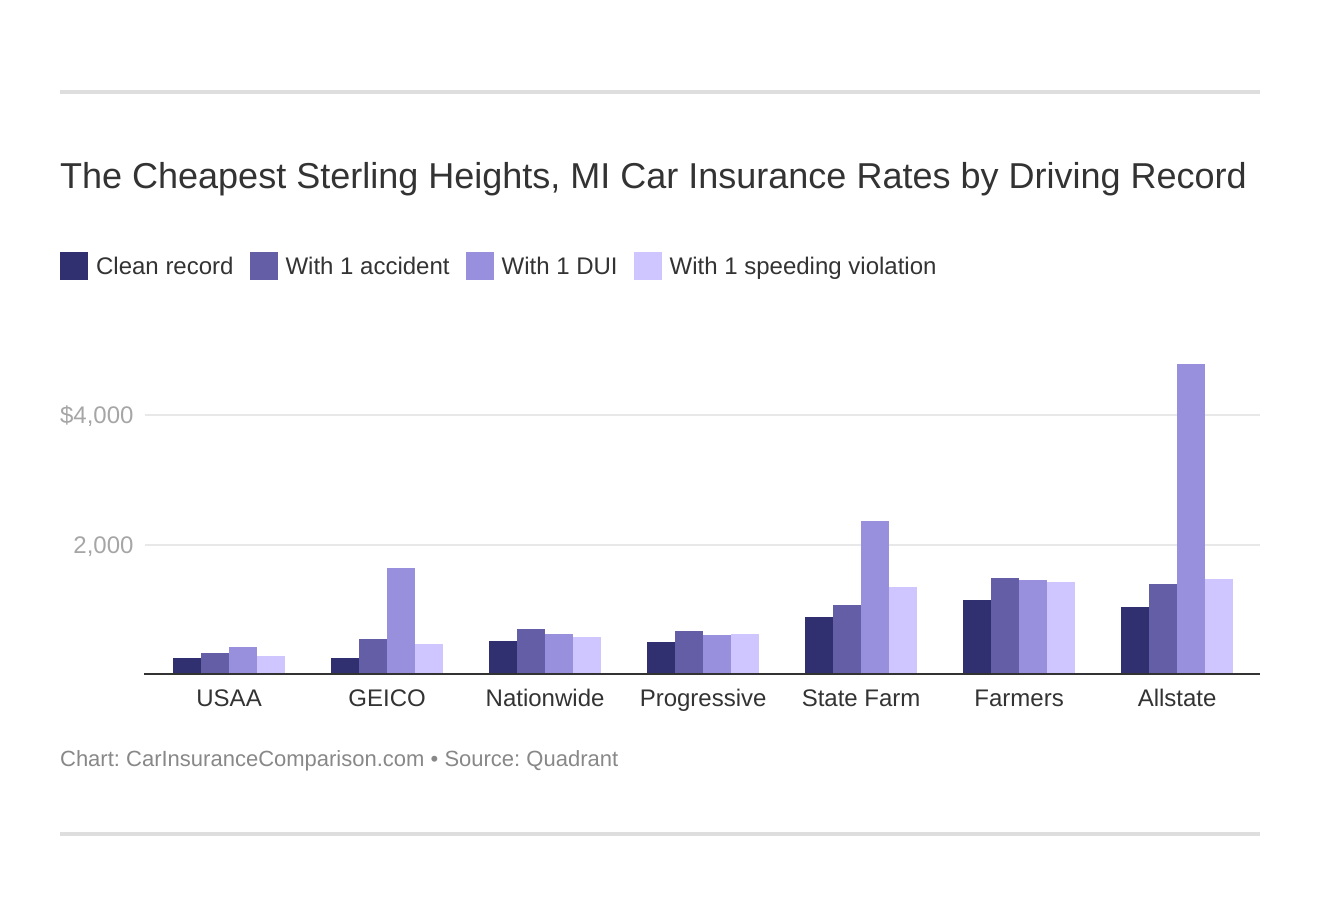 The Cheapest Sterling Heights, MI Car Insurance Rates by Driving Record